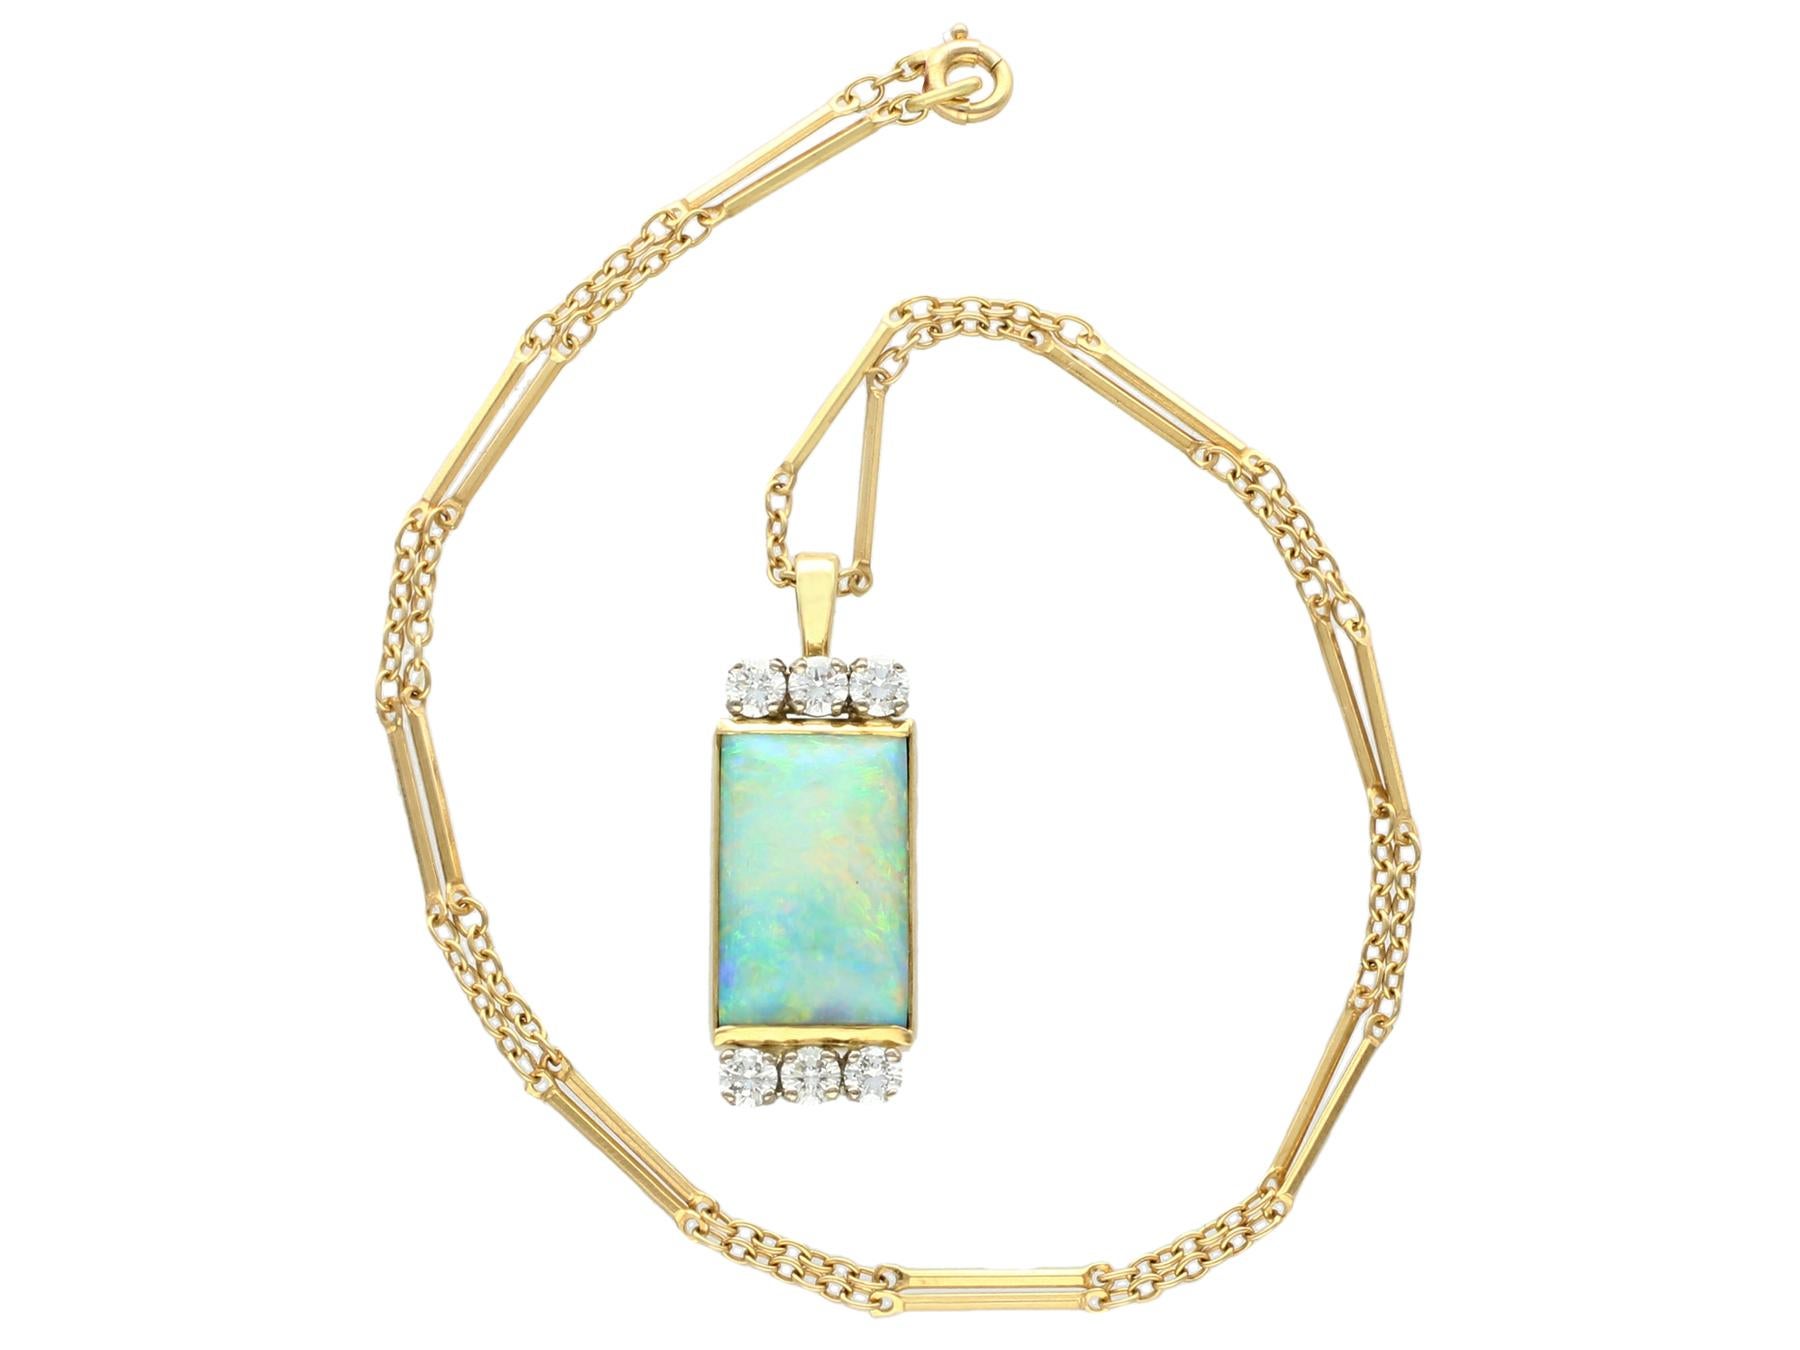 A fine and impressive 3.18 carat opal and 0.63 carat diamond, 18 karat yellow and white gold pendant; part of our diverse antique jewelry and estate jewelry collections.

This fine and impressive vintage opal pendant has been crafted in 18k yellow